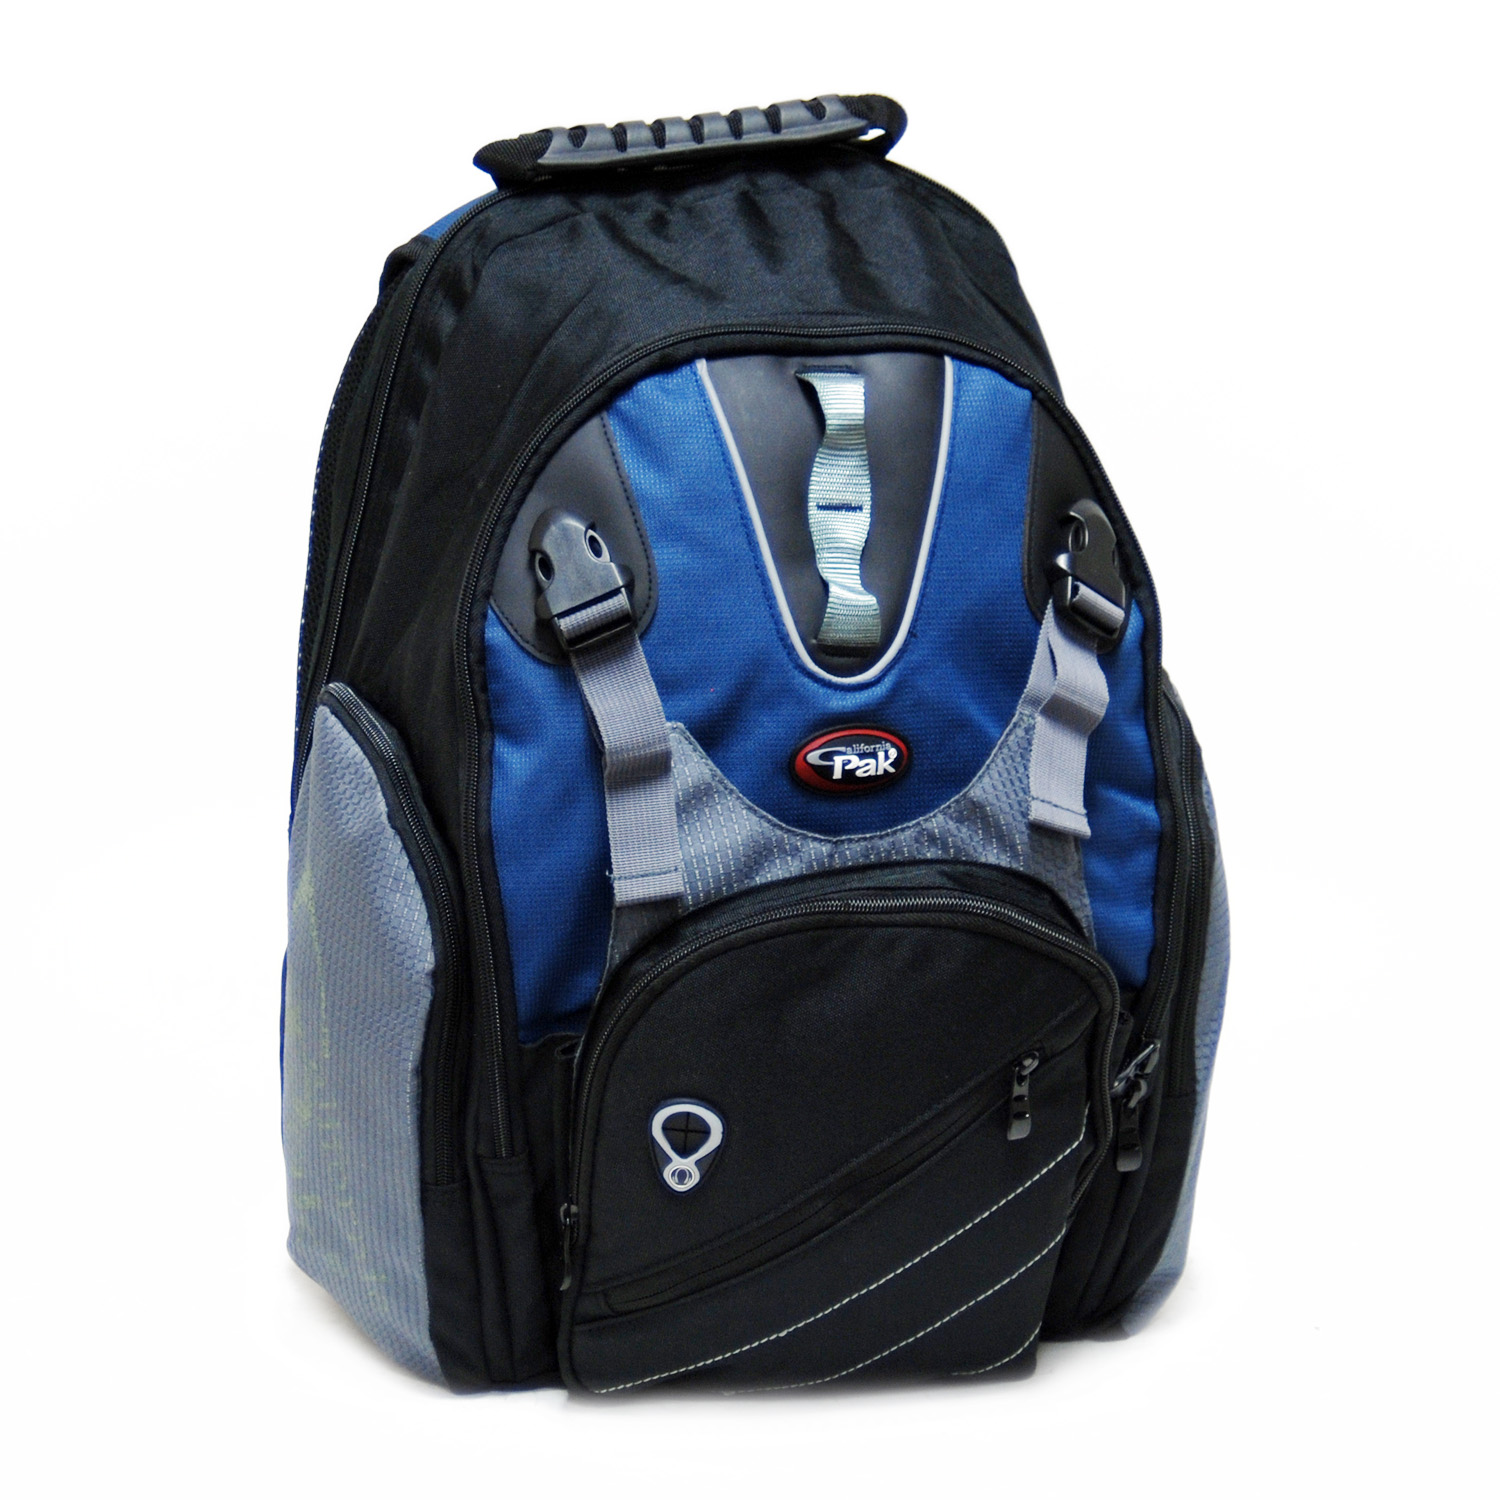 18" Backpack With Front Buckle (Spider)